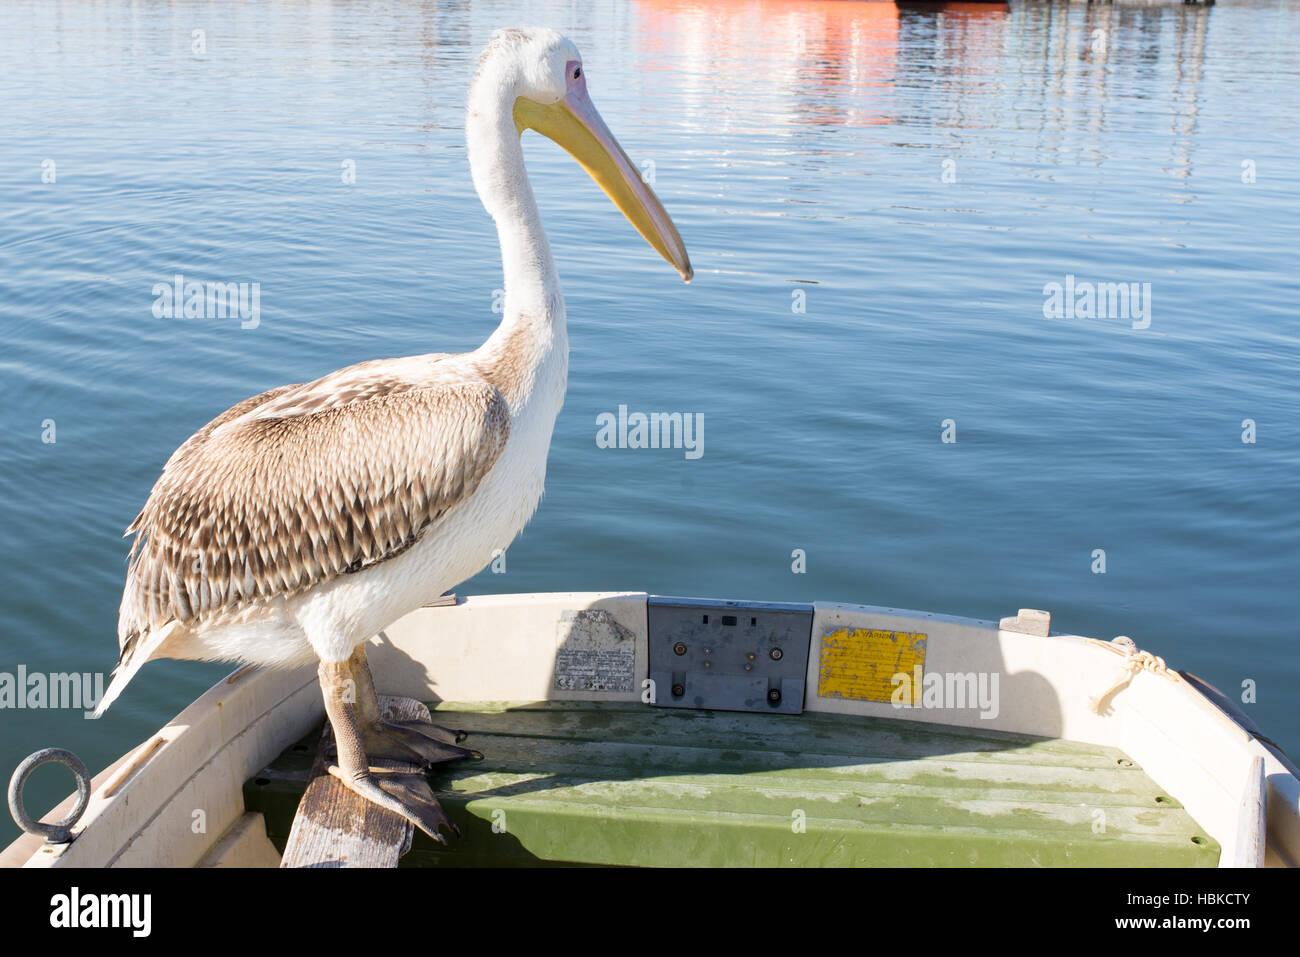 Young Pelican on Edge of Dingy Stock Photo